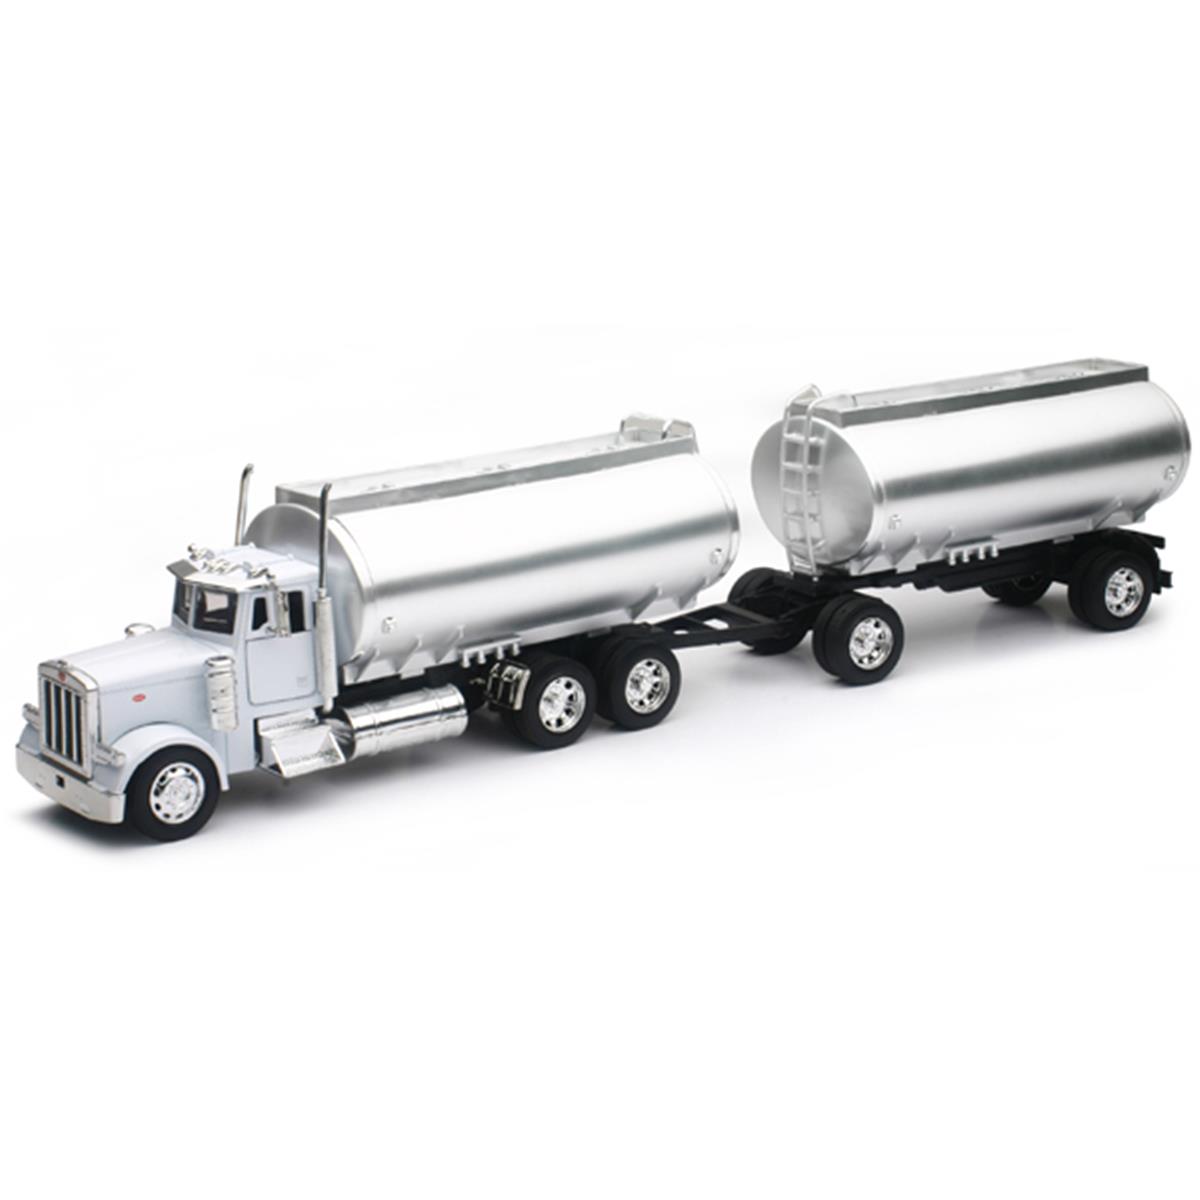 New-ray Newss-14333 Peterbilt 379 Twin Oil Tanker Model Truck In White With Chrome Tanks